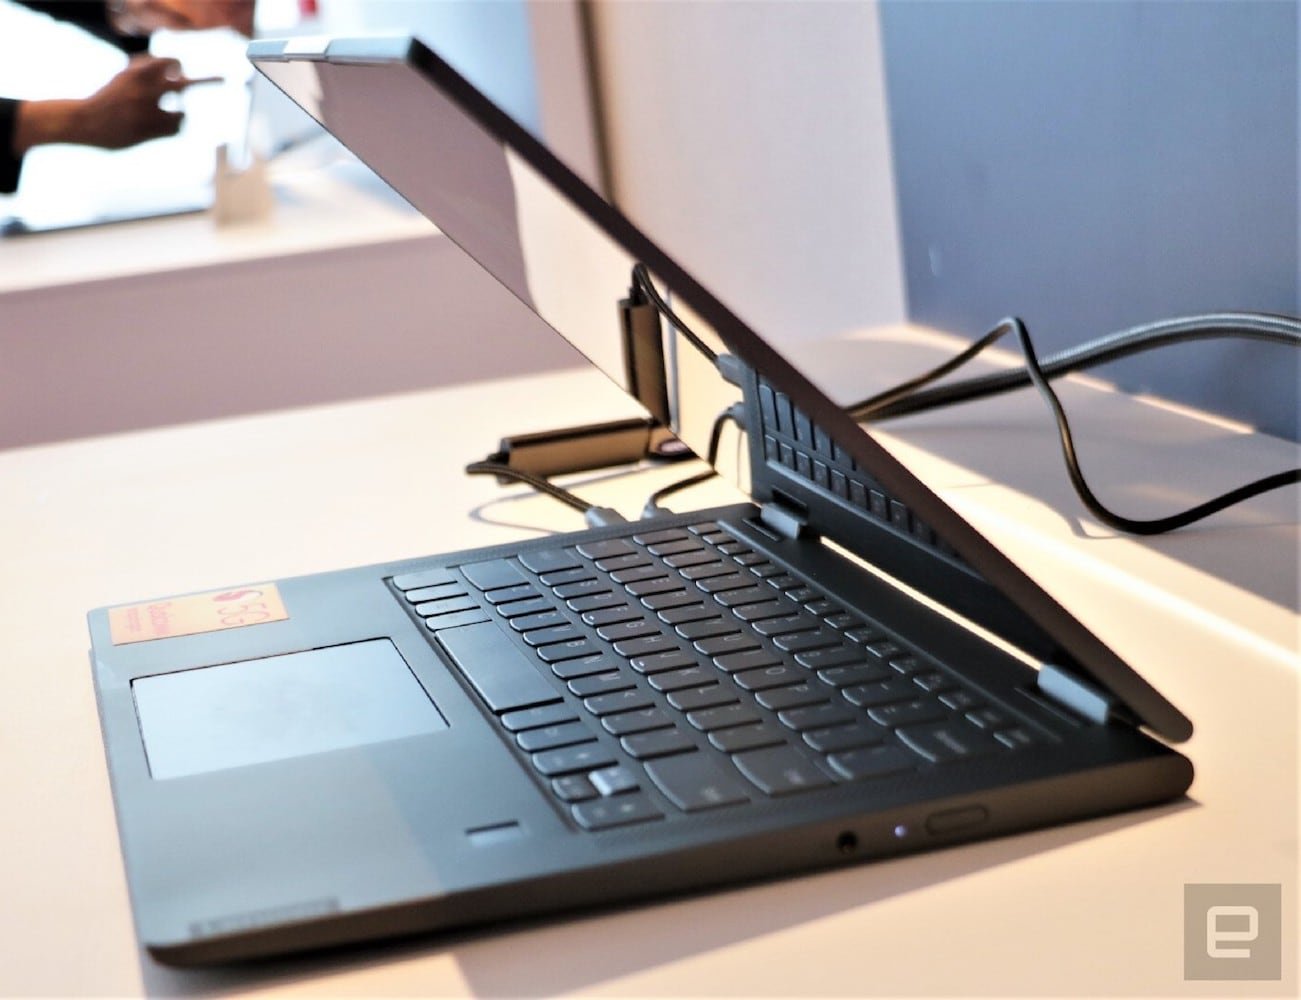 Lenovo Project Limitless Prototype 5G Laptop is the first of its kind